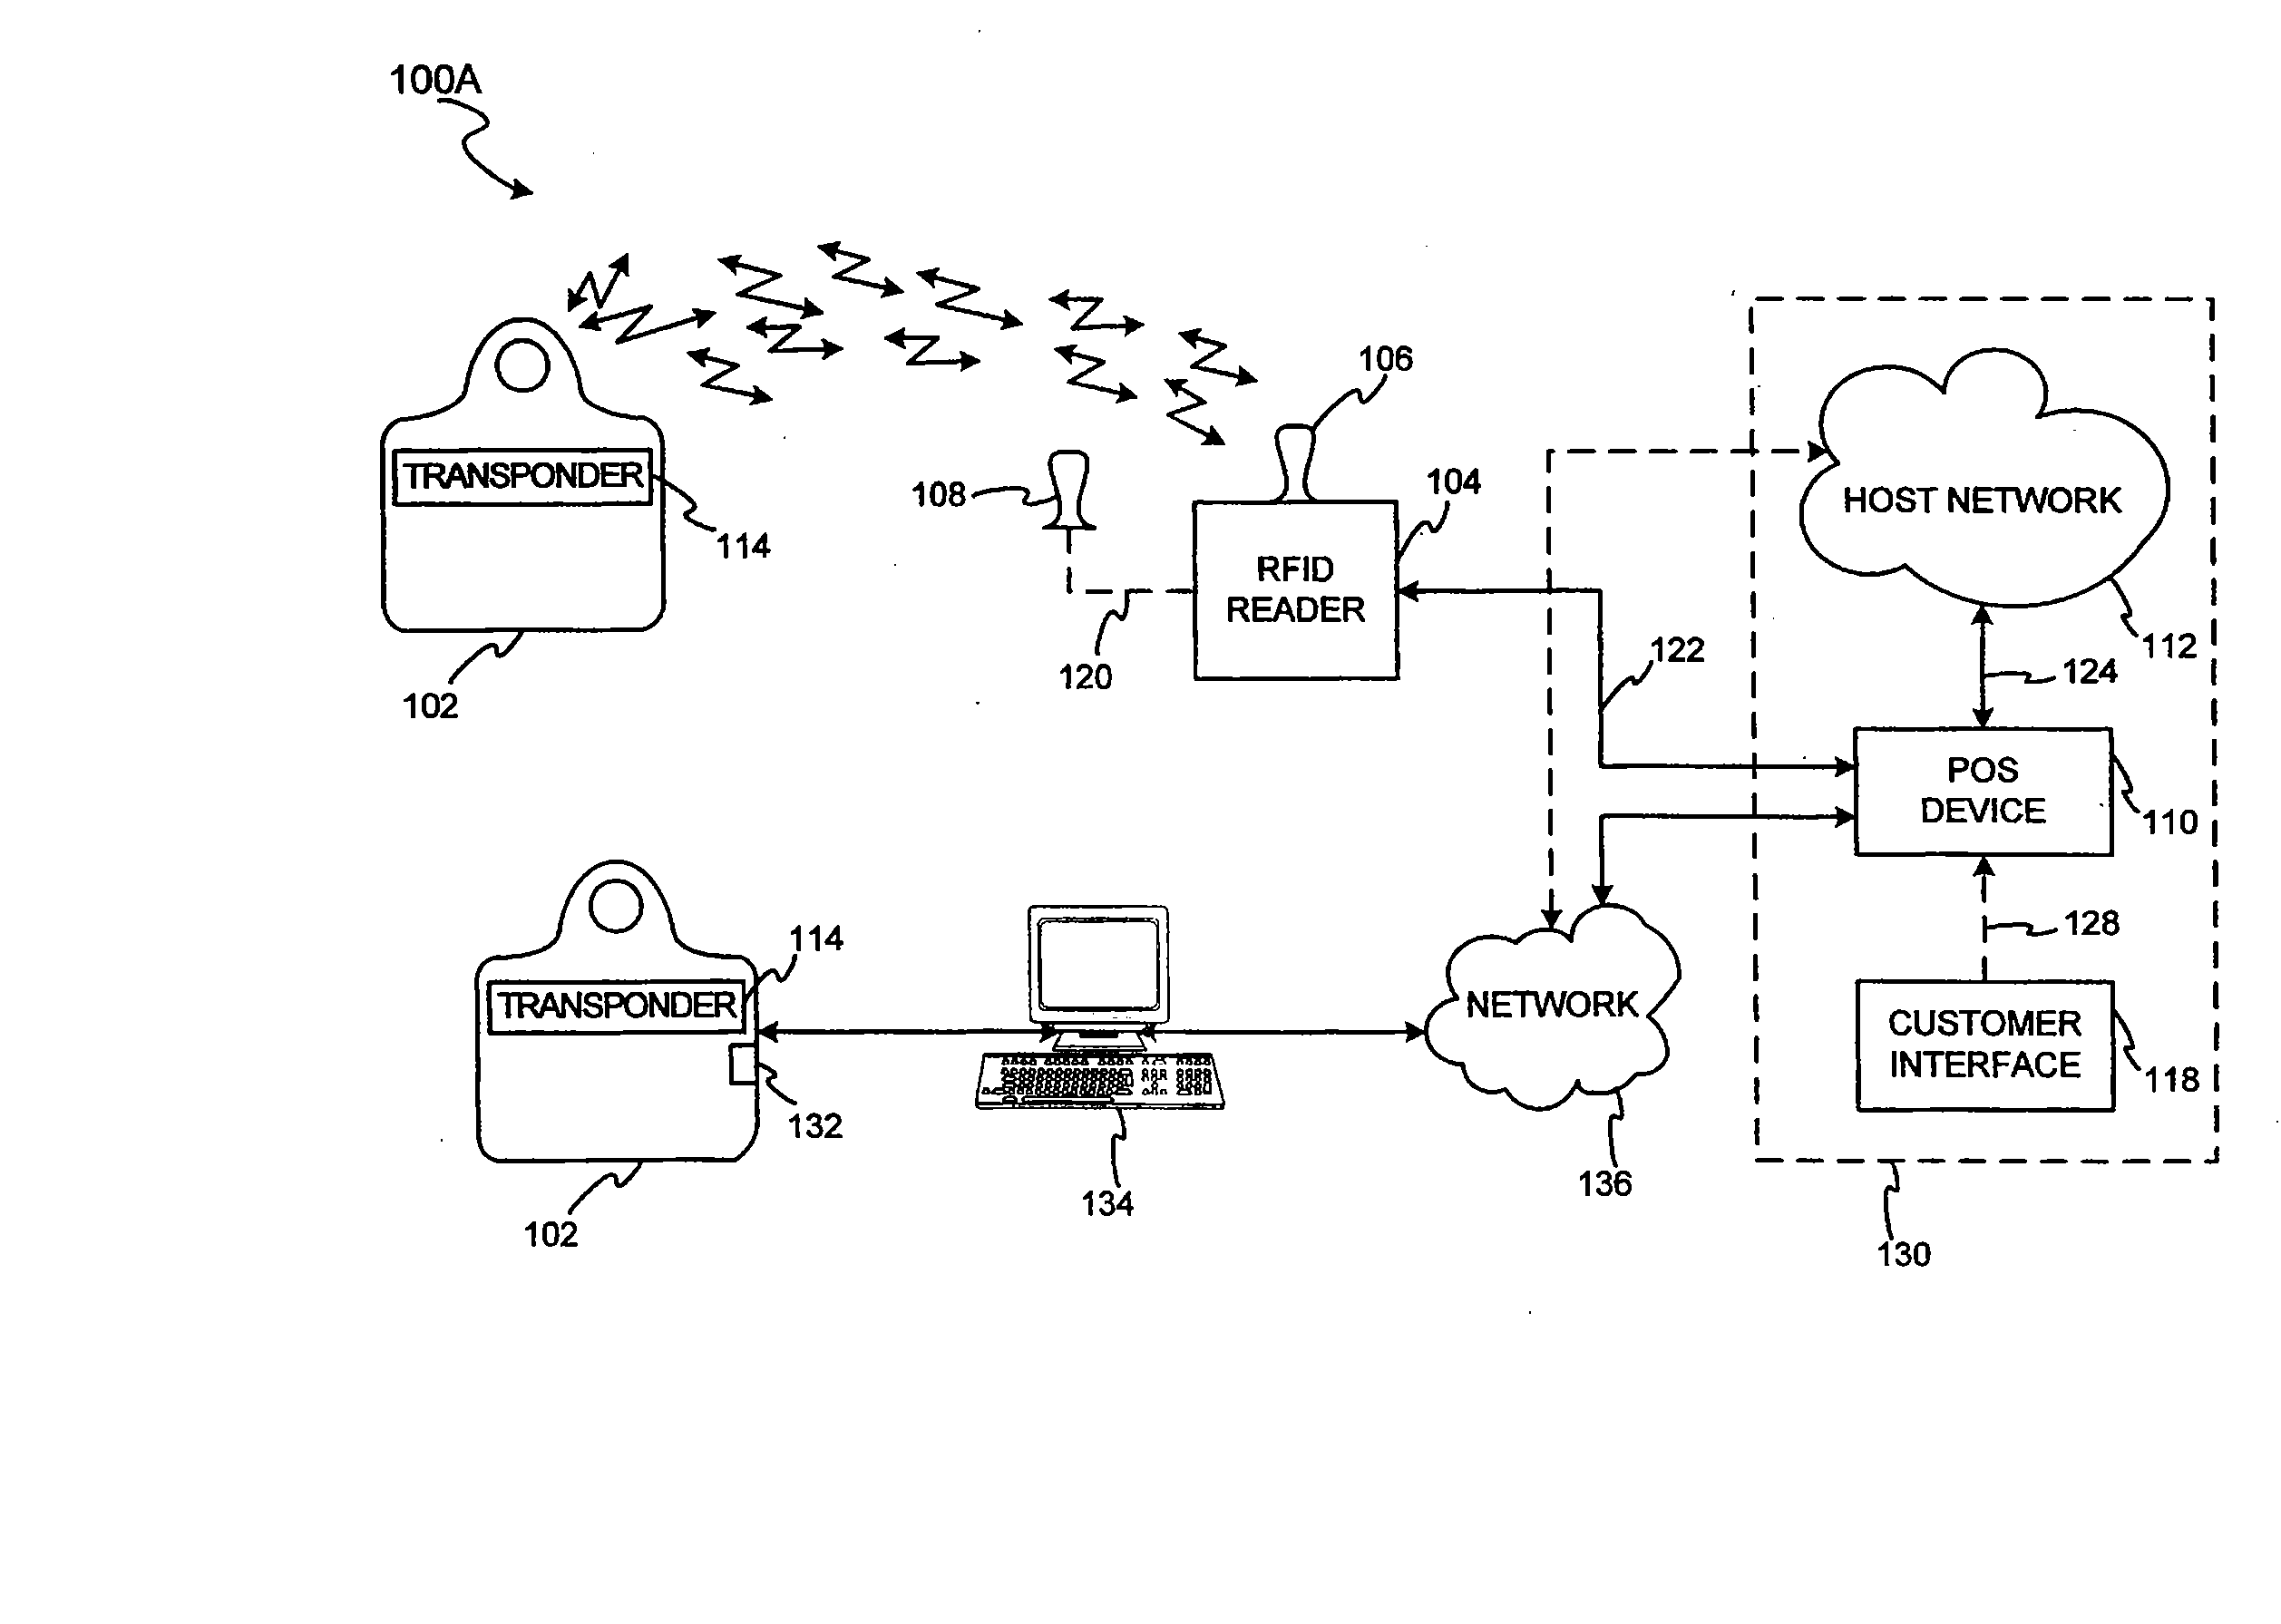 System and method for proffering multiple biometrics for use with a fob